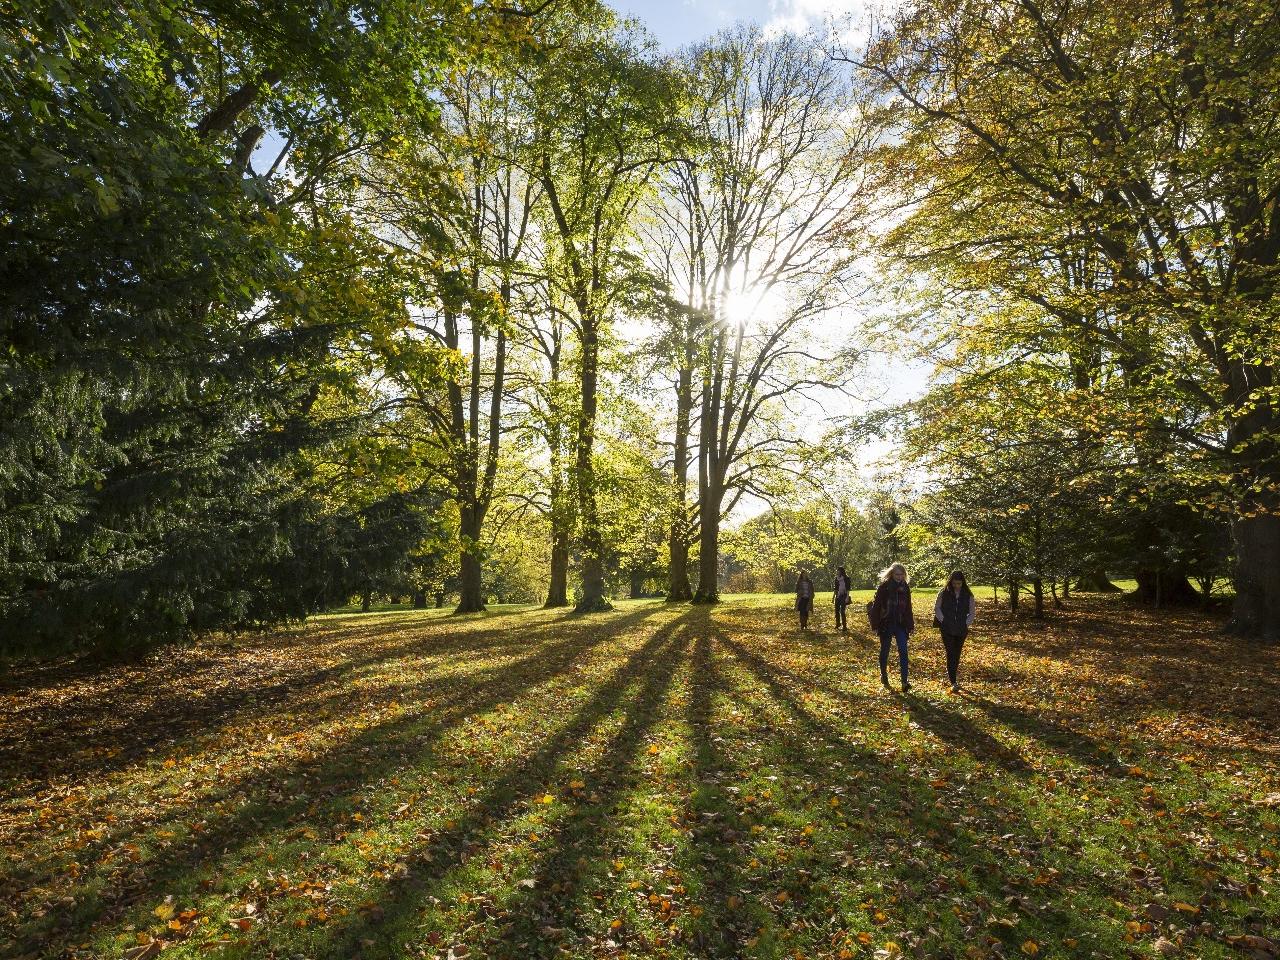 The grounds of Waddesdon Manor are the perfect setting for tranquil stroll